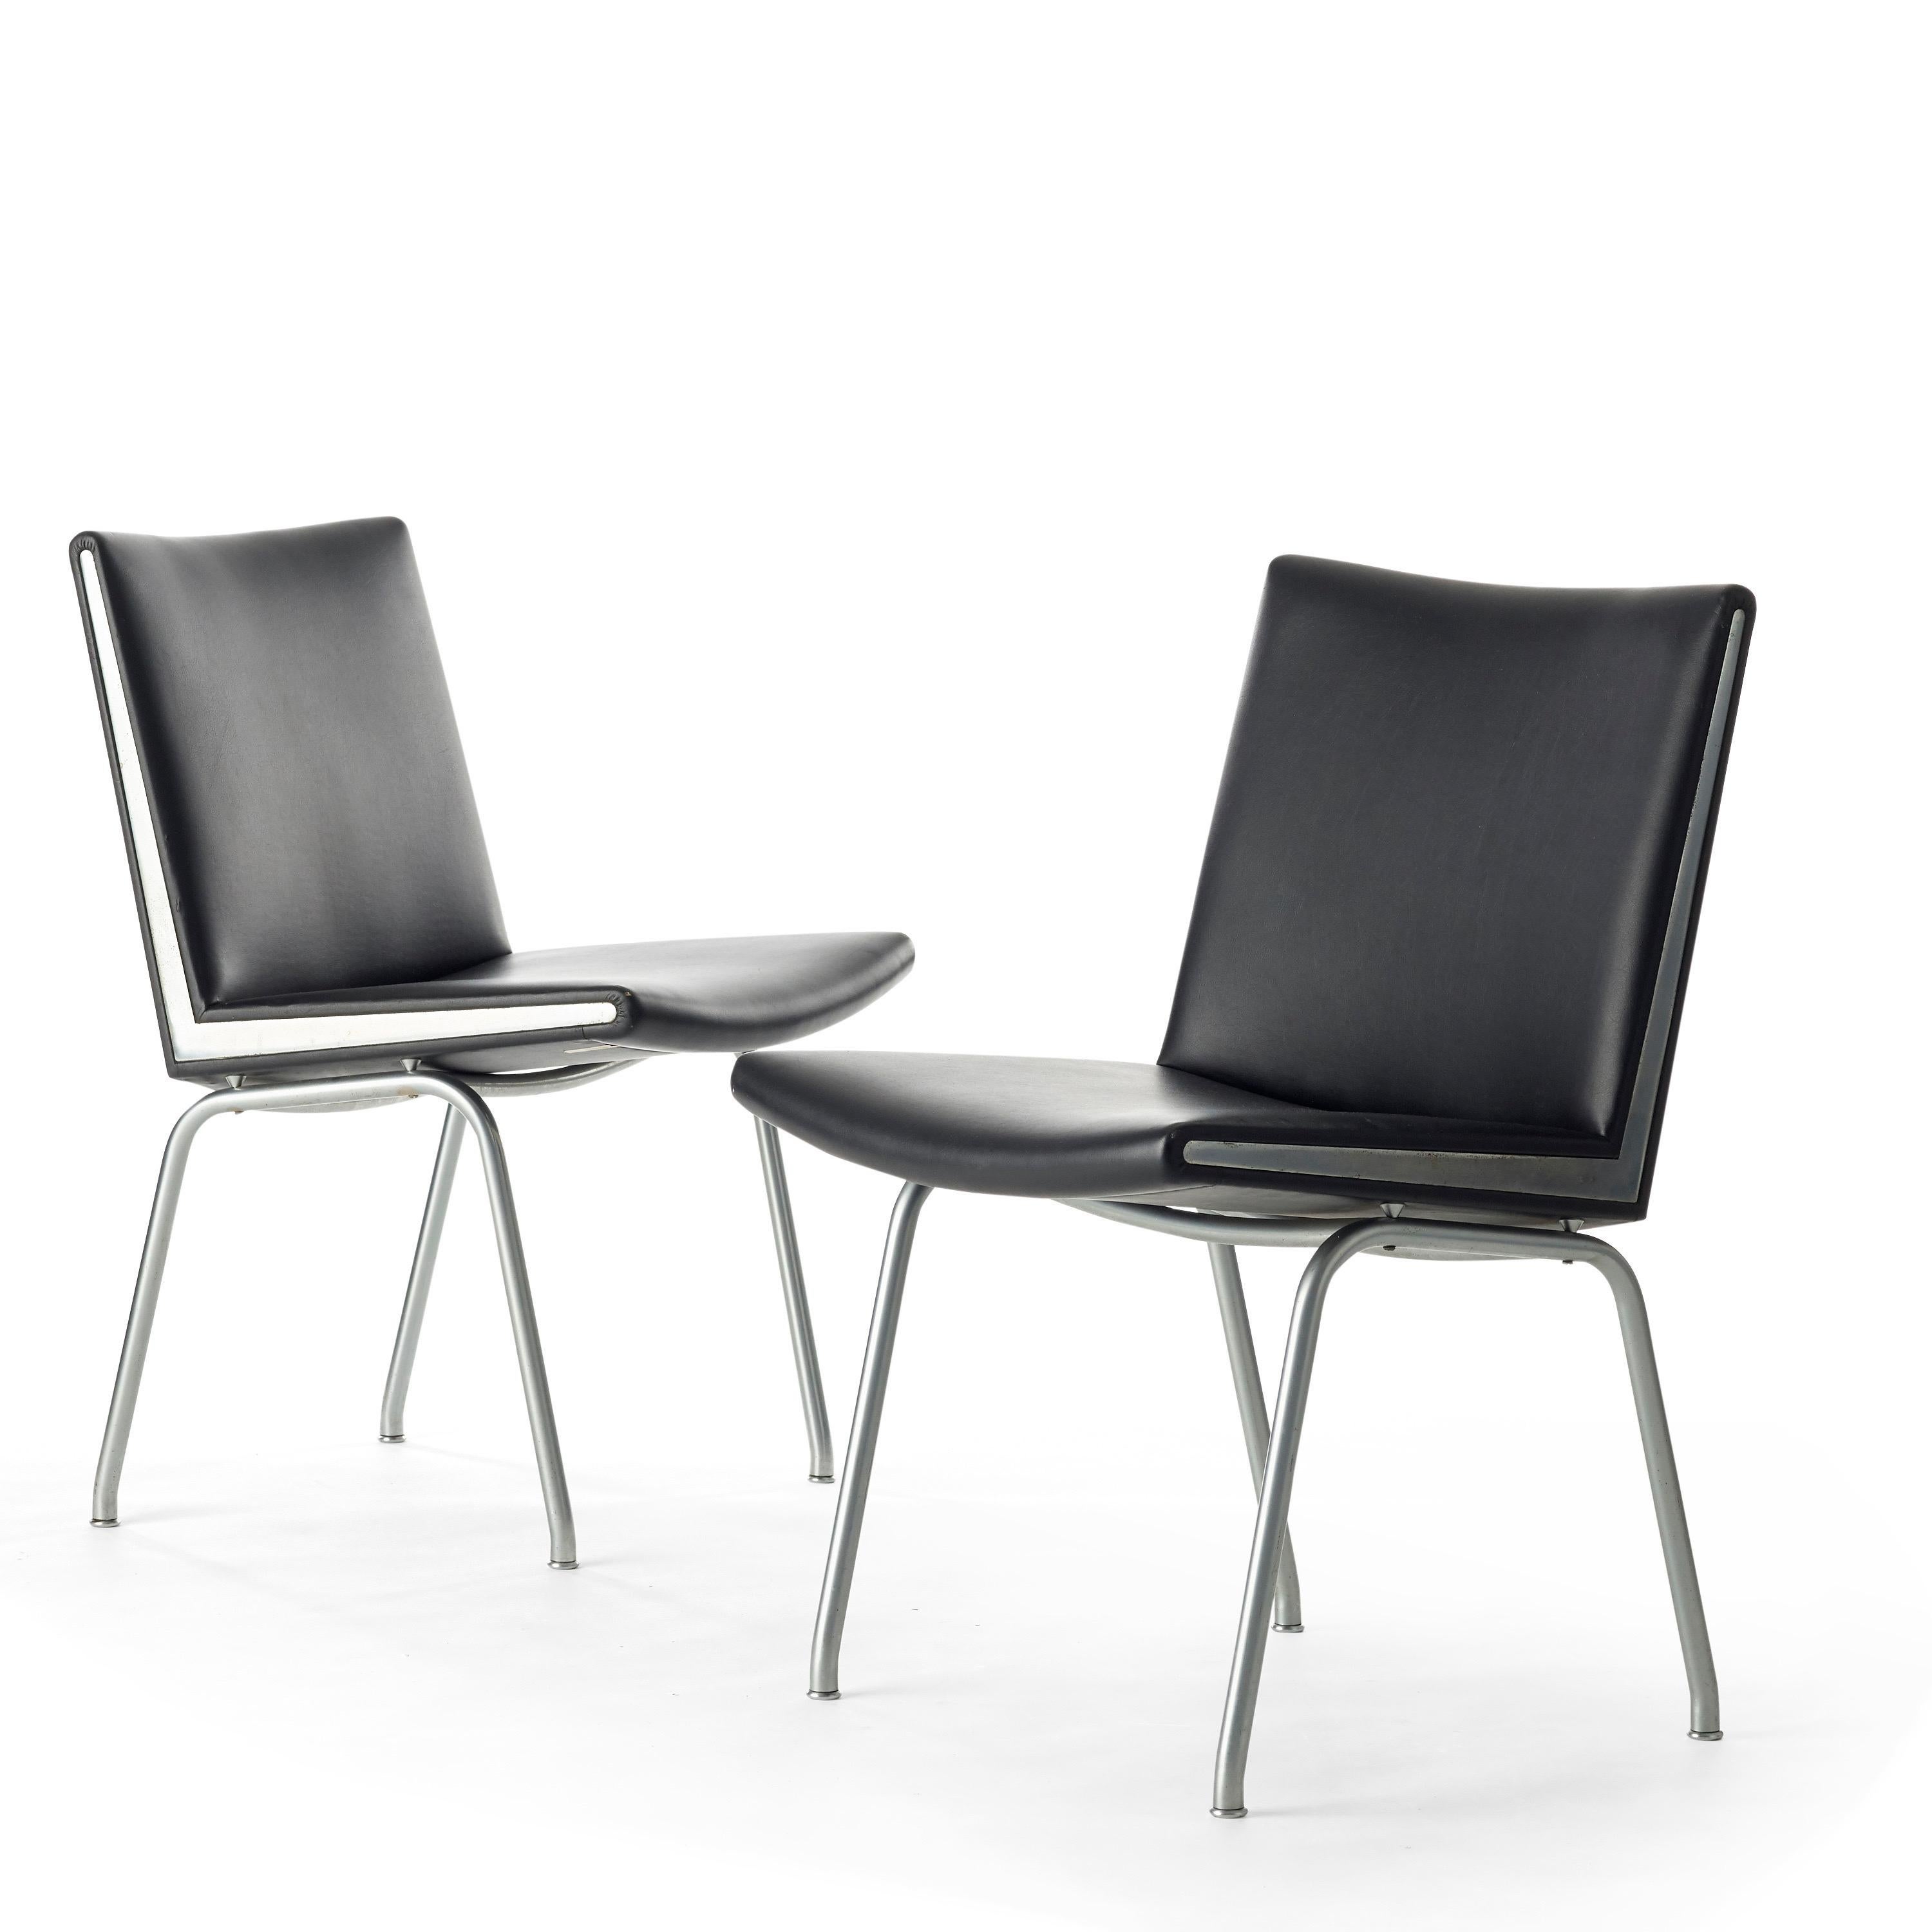 Set of Two Black Vinyl and Steel Kastrup Chairs by Hans Wegner For Sale 1